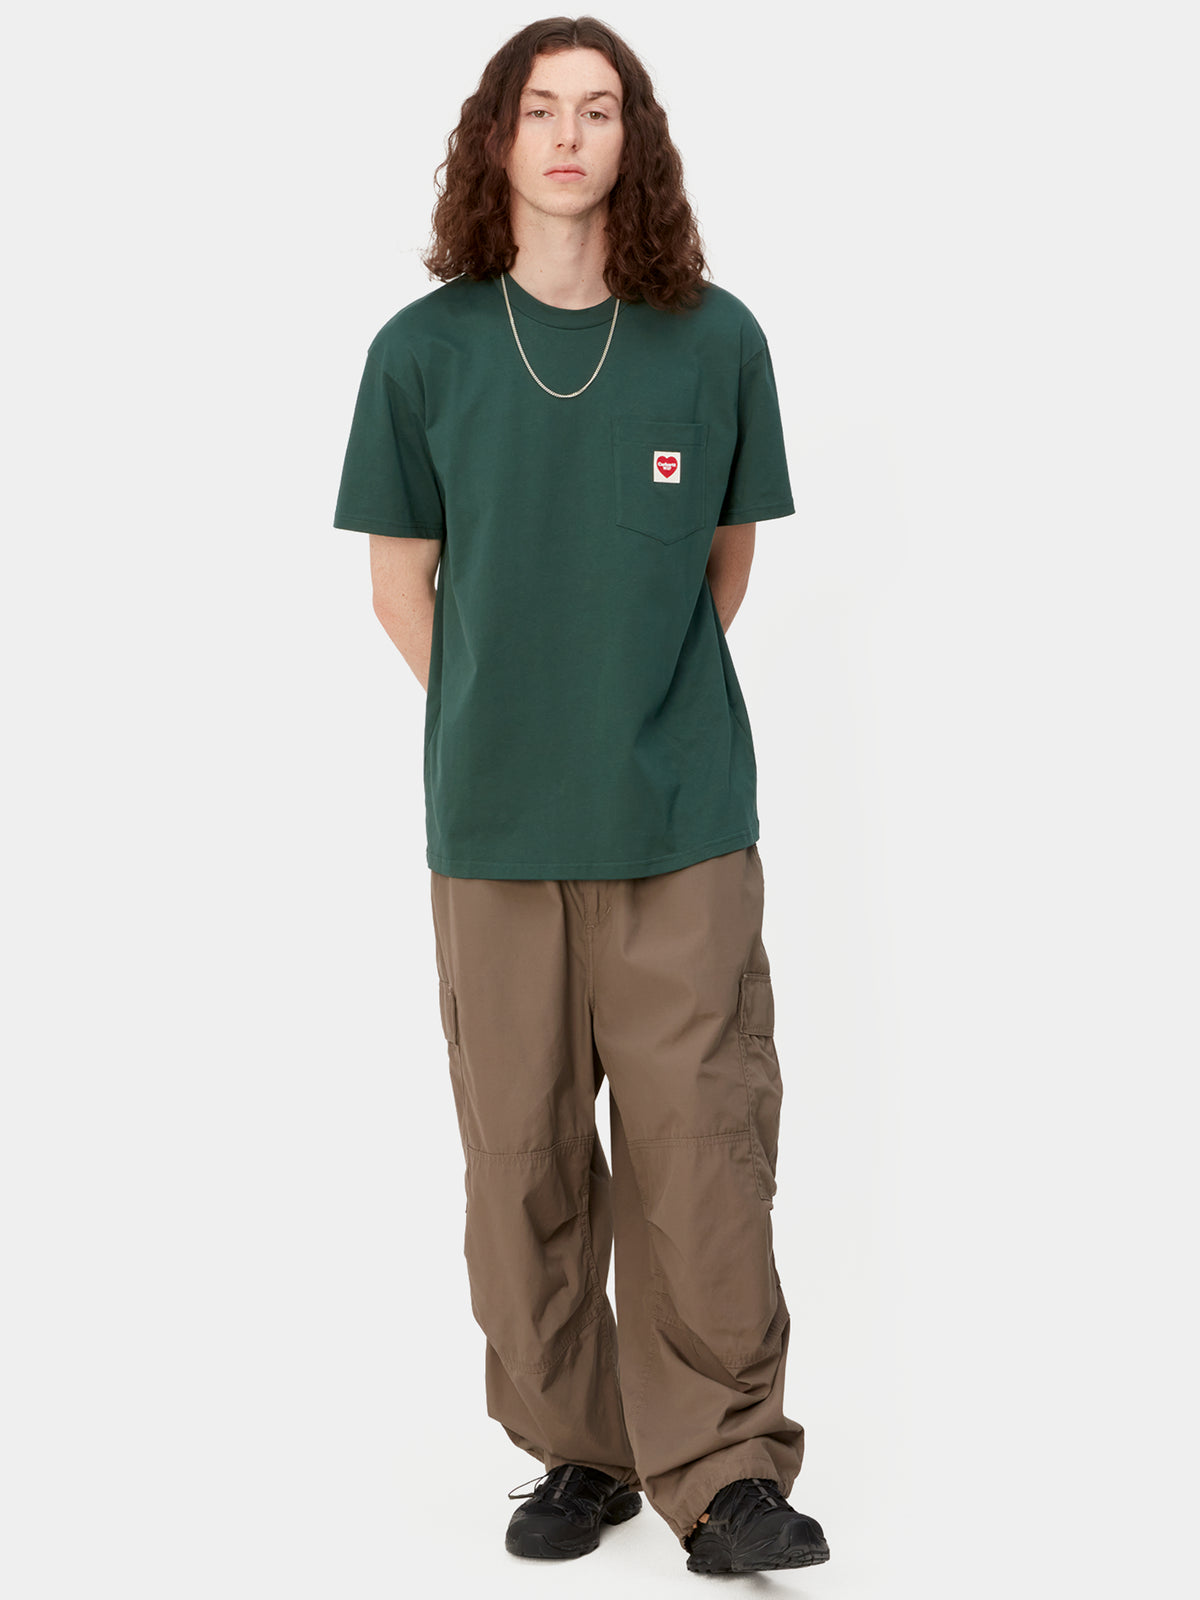 Short Sleeve Heart Pocket T-Shirt in Discovery Green